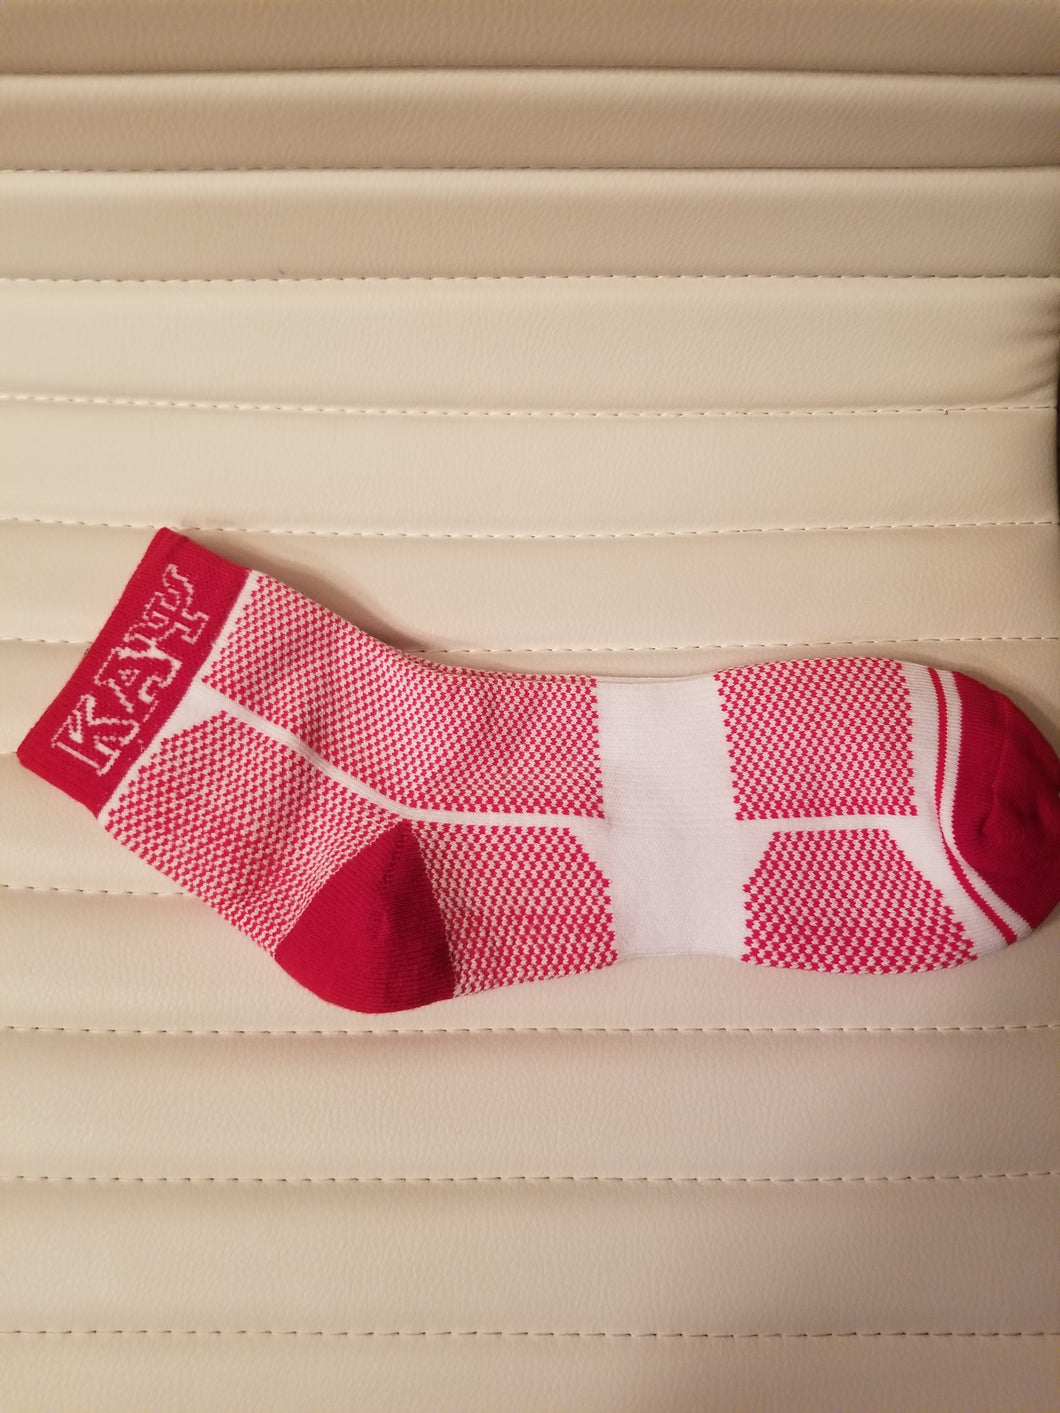 KAPPA RED AND WHITE WAFFLE SOCK - CLOSEOUT SALE !!